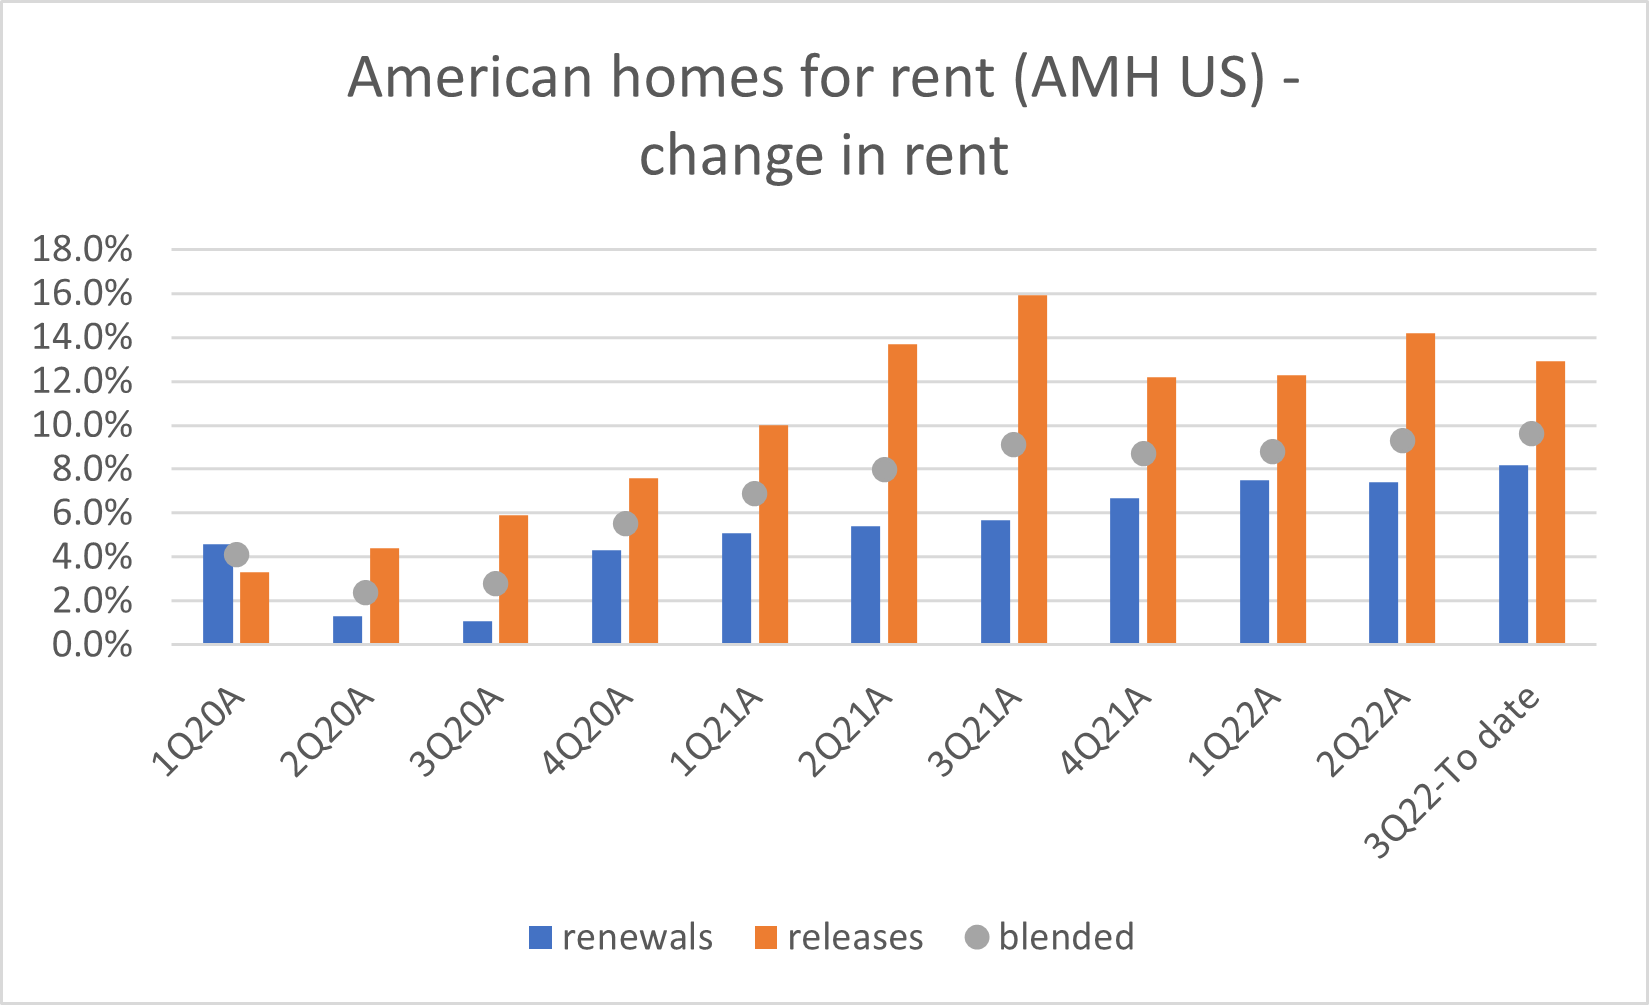 Source: American Homes 4 Rent